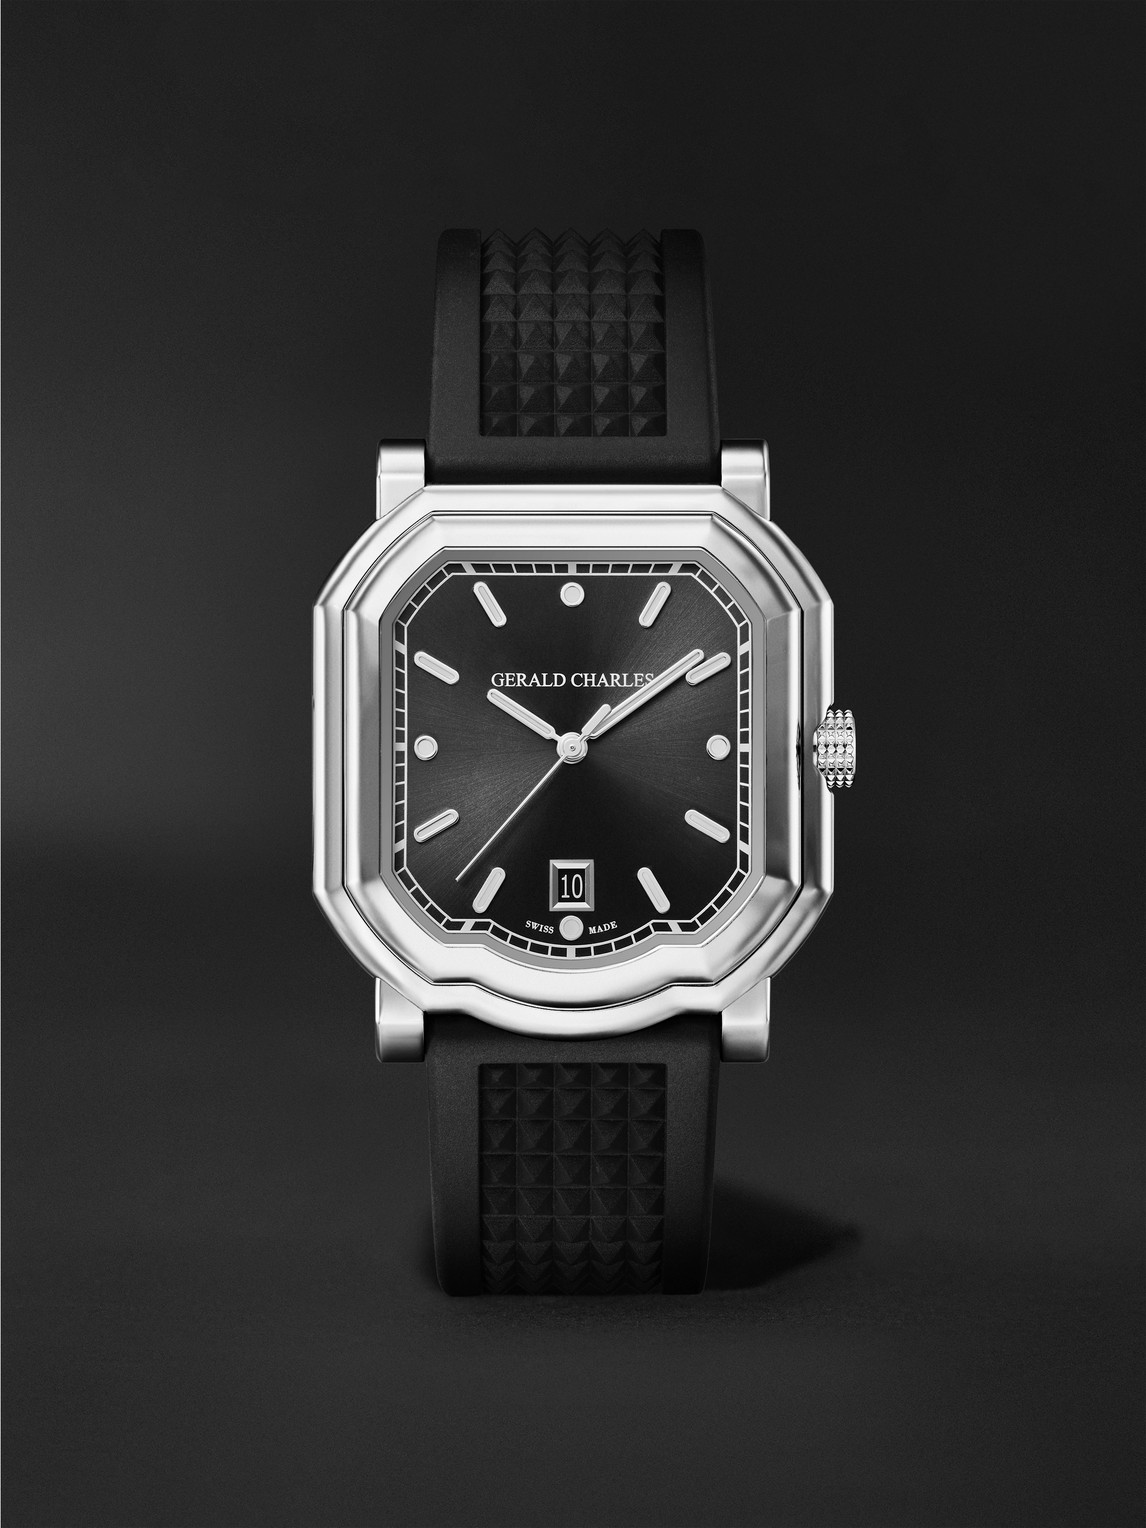 Gerald Charles Maestro 2.0 Ultra-thin Automatic 39mm Stainless Steel And Rubber Watch, Ref. No. Gc2.0-a-00 In Black